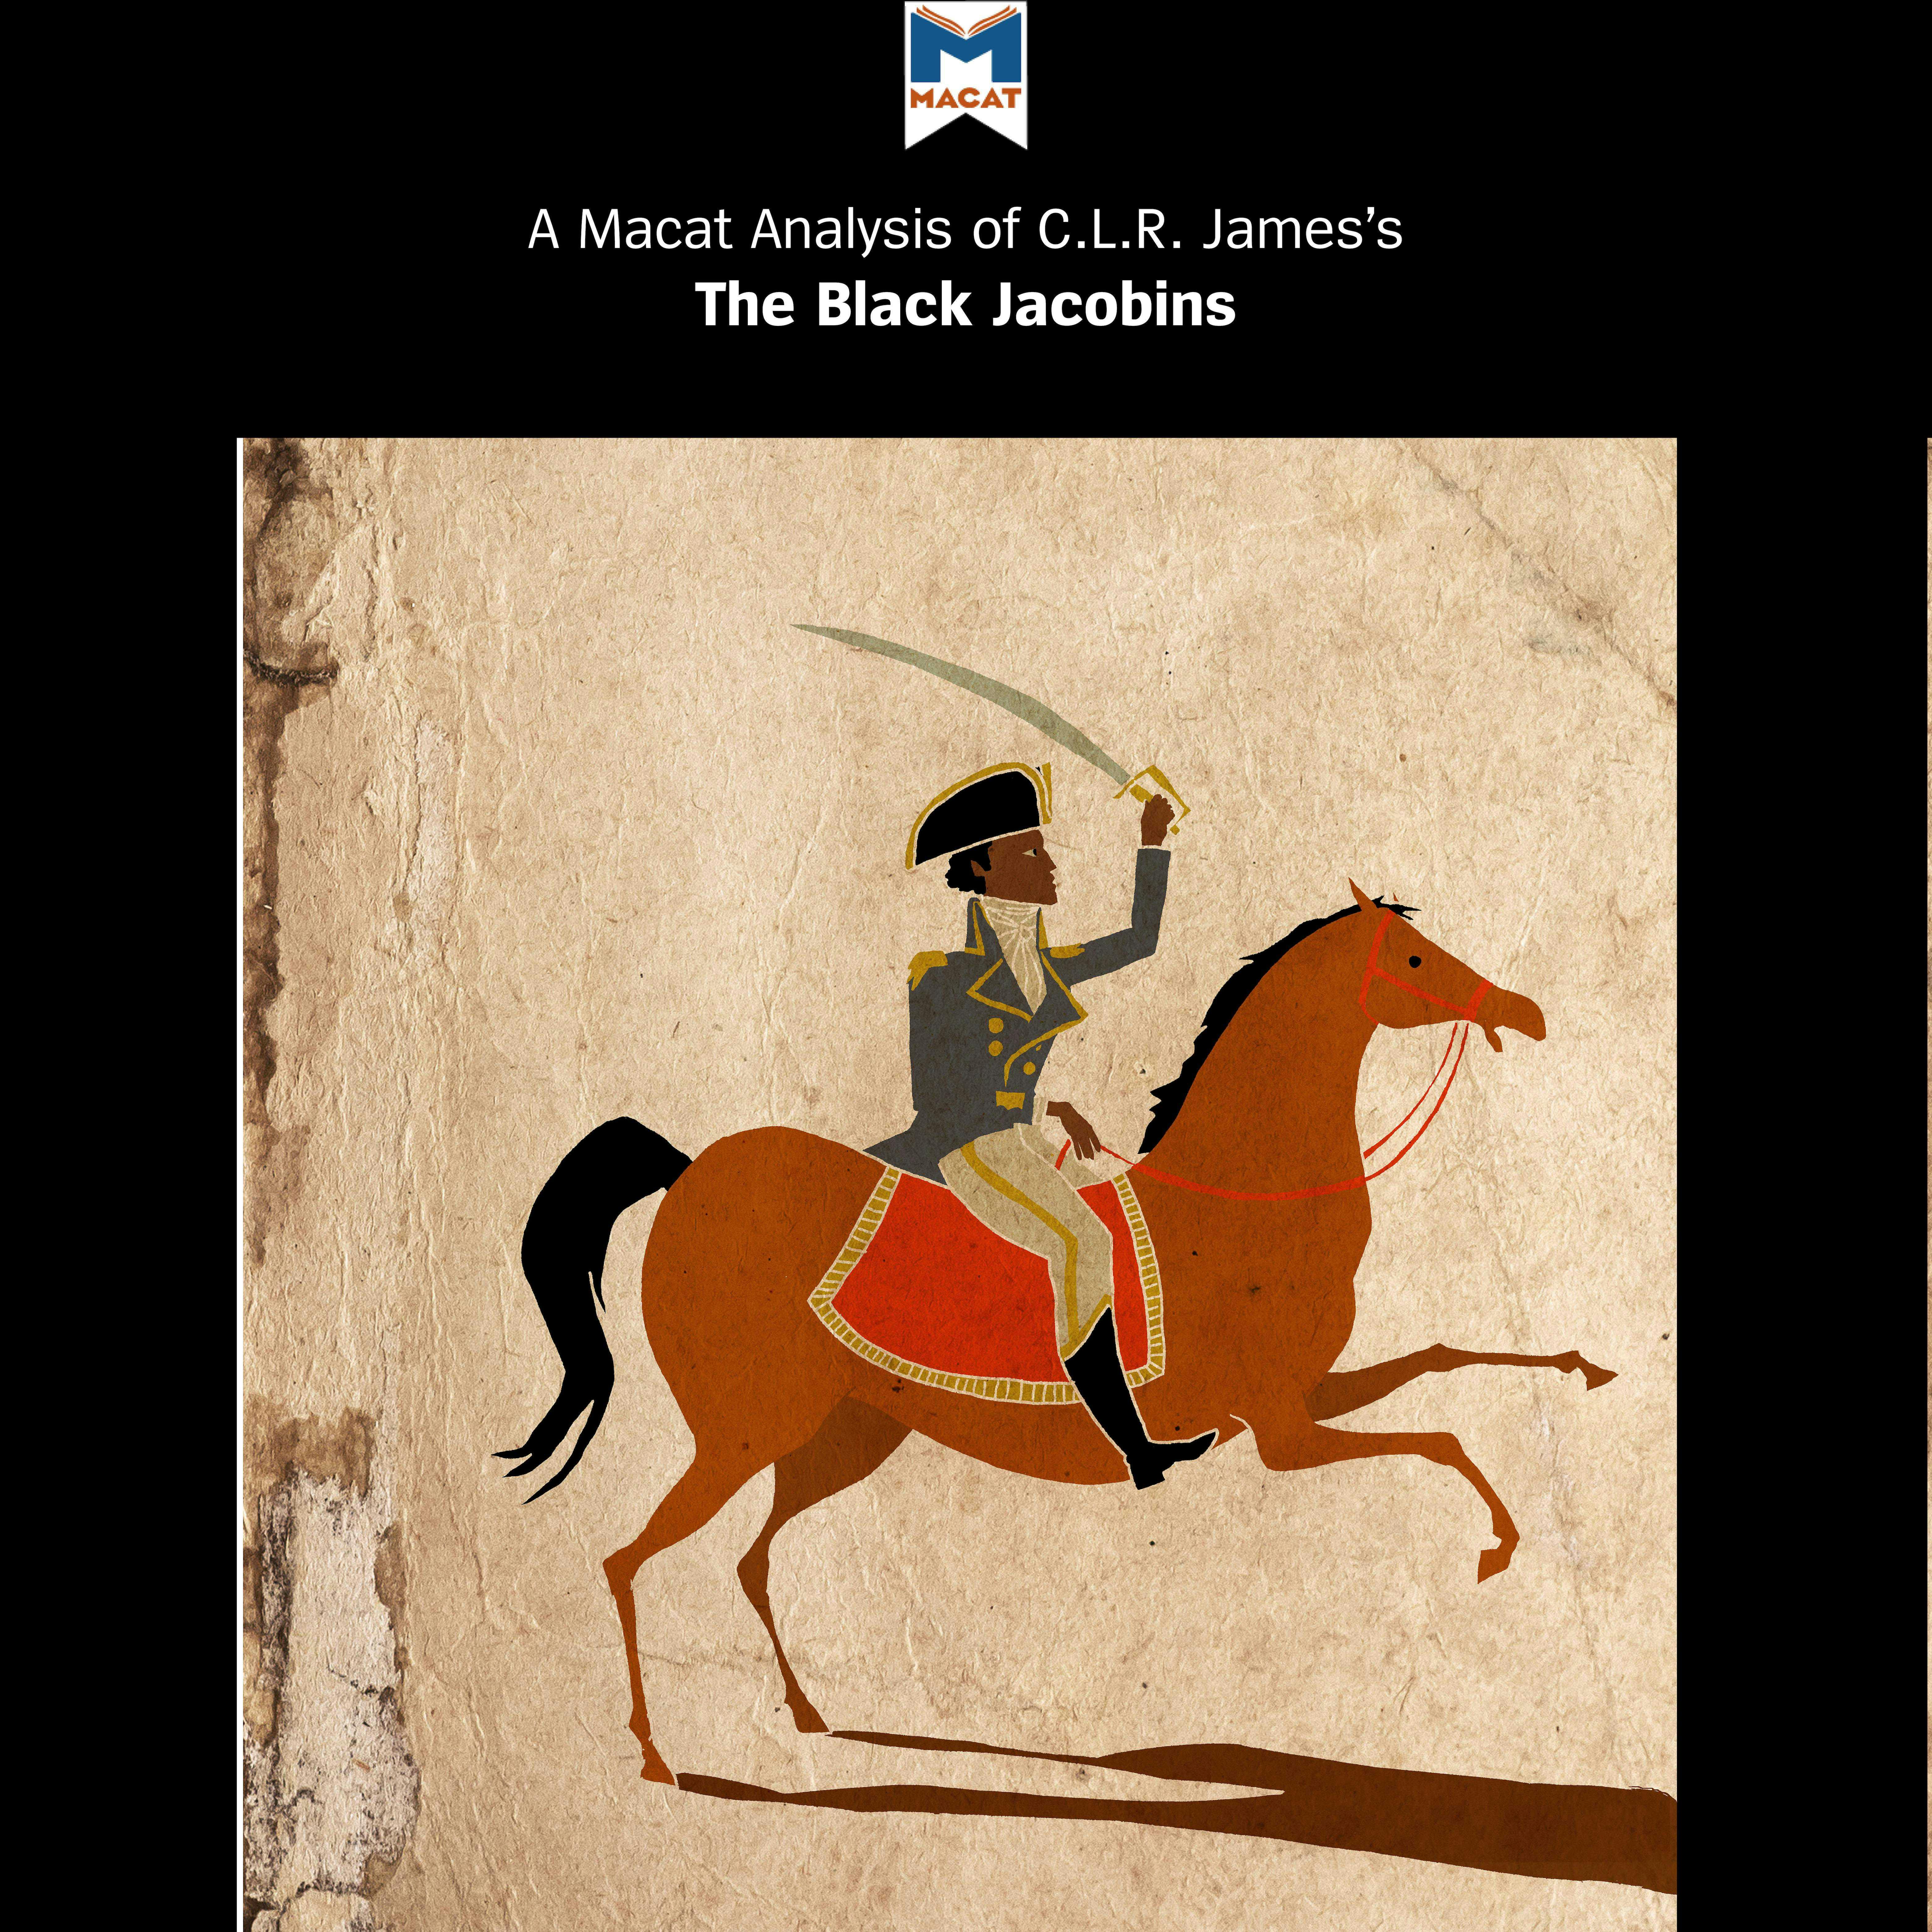 A Macat Analysis of C. L. R. James's The Black Jacobins - undefined